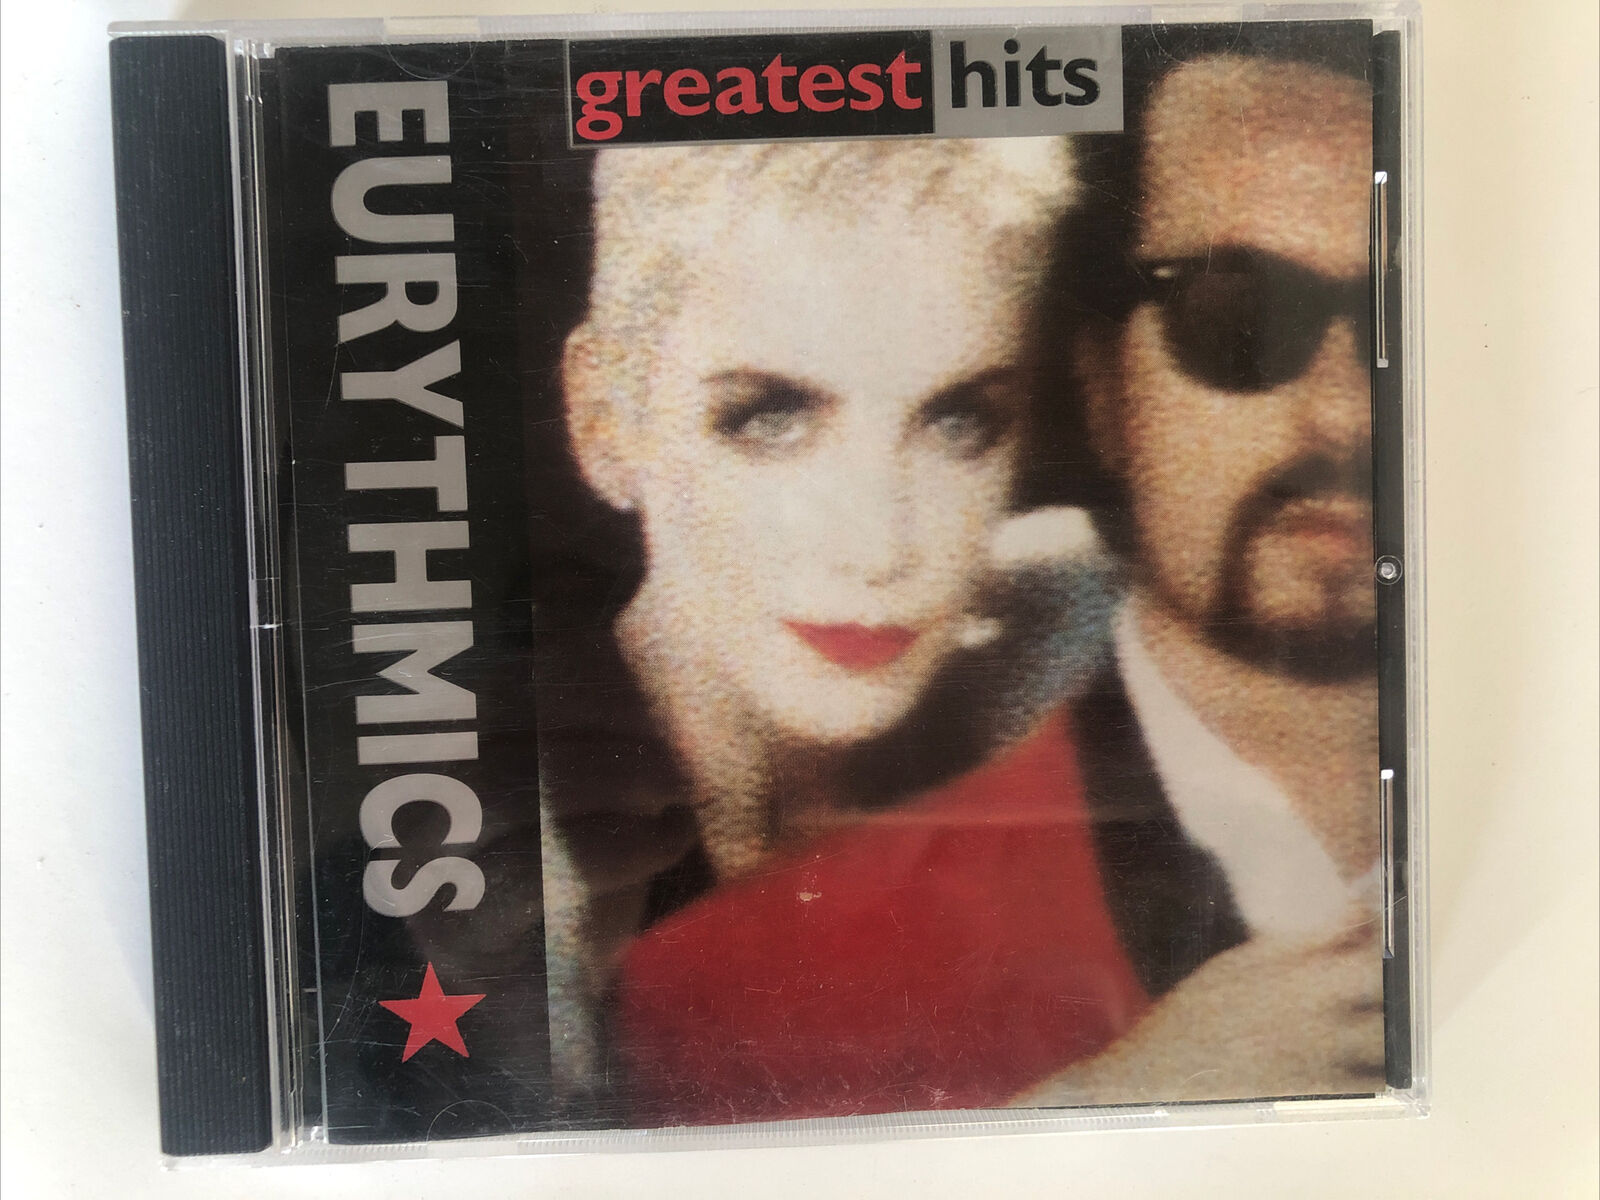 Greatest Hits by Eurythmics (CD, 1991 BMG